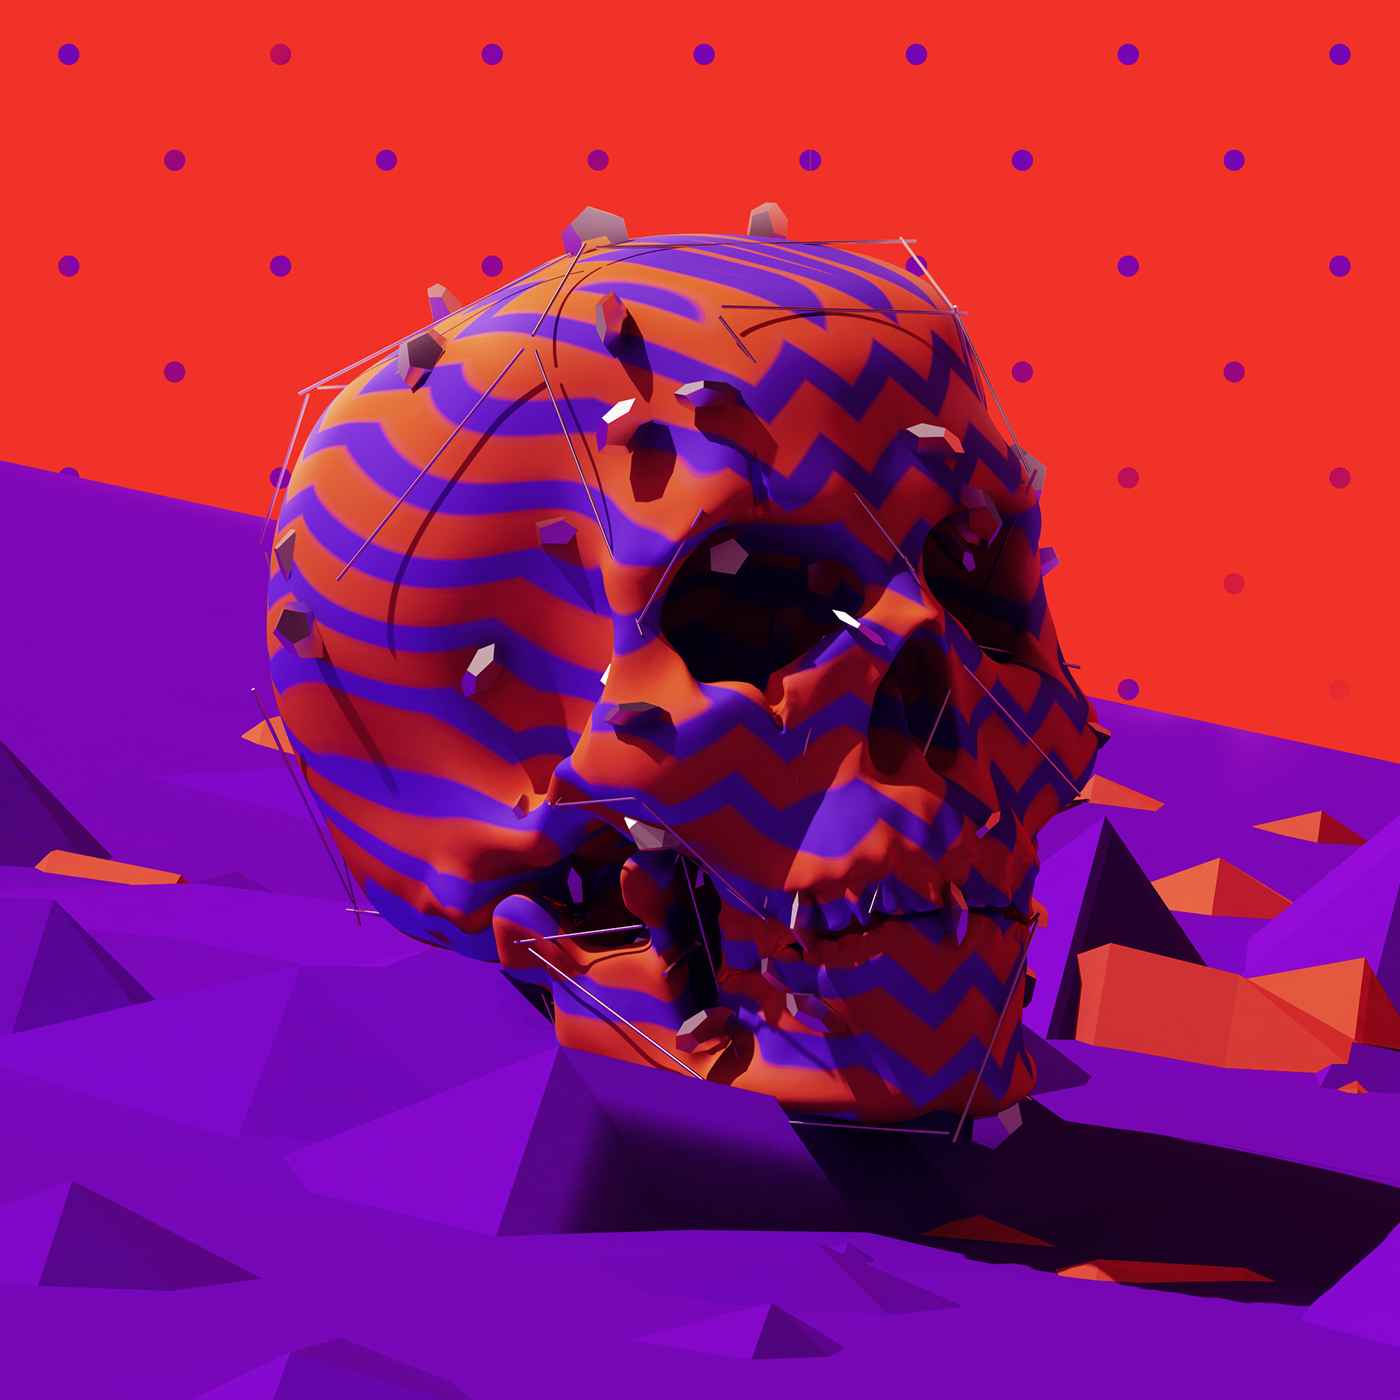 Sebastian andaur daily Project vray cinema 4d instagram social colorful skull Candy color Santiago chile Ps25Under25